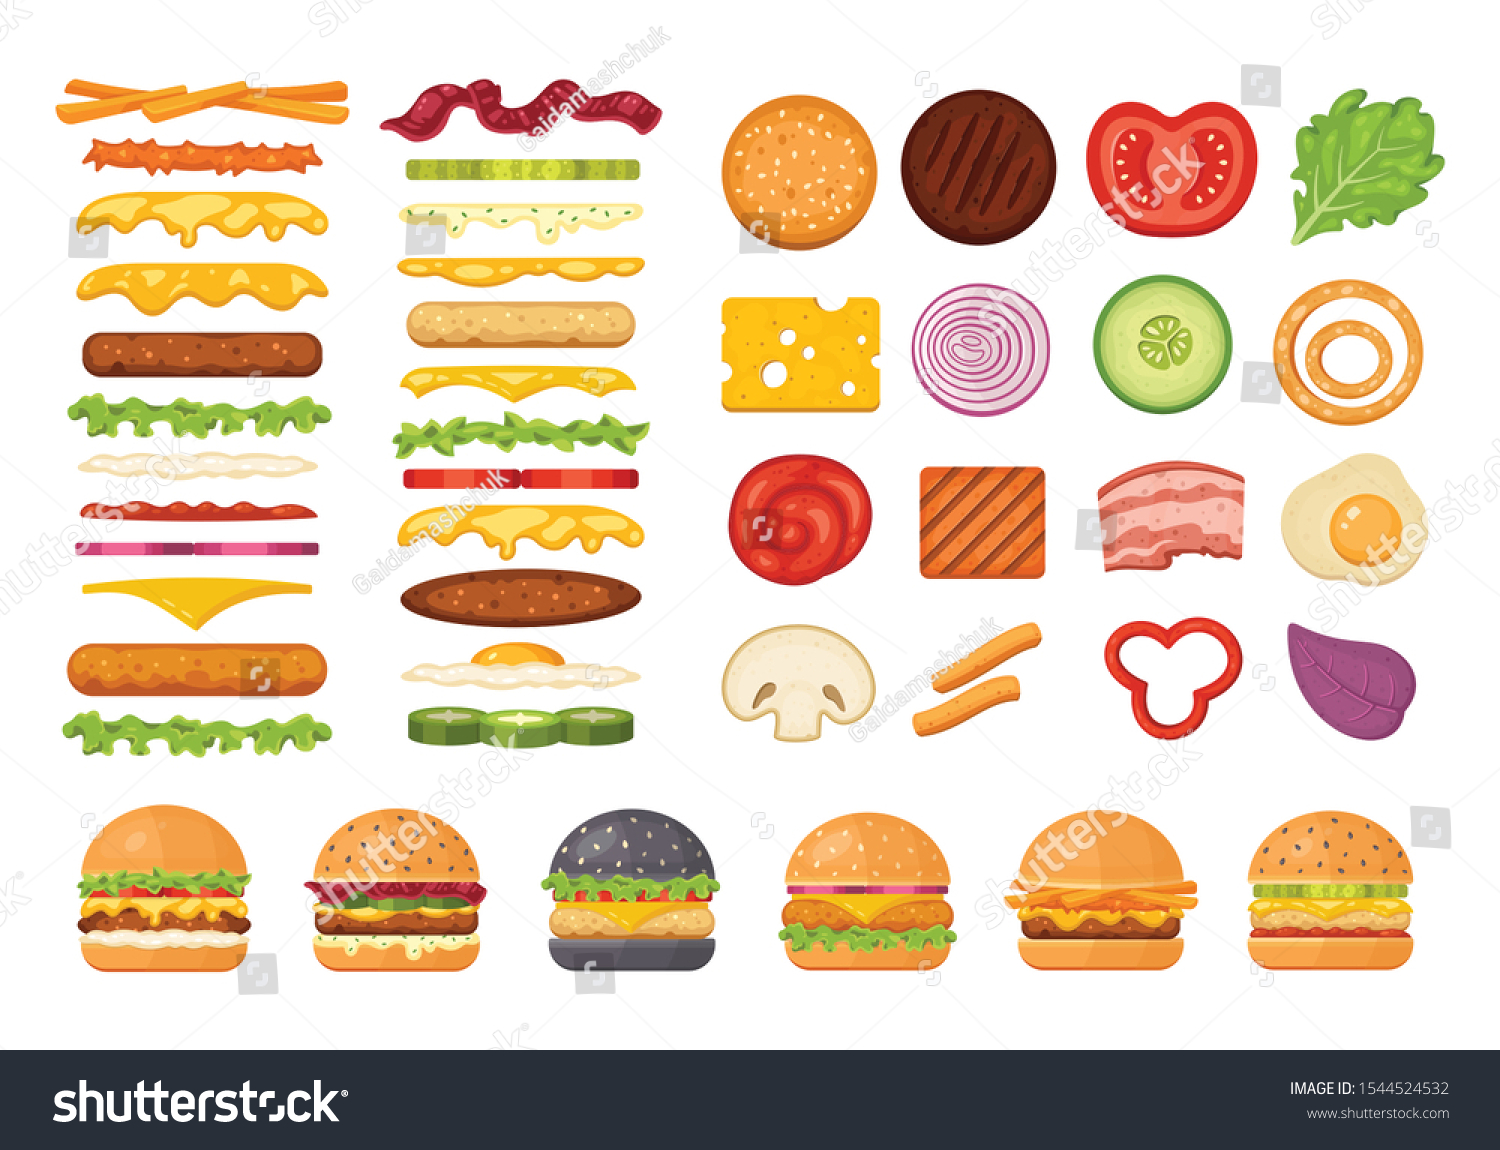 SVG of Big set of vector ingredients for burger and sandwich top view and front. Elements for different burgers isolated on white backgroud. Fastfood hamburger maker with flying ingredients. svg